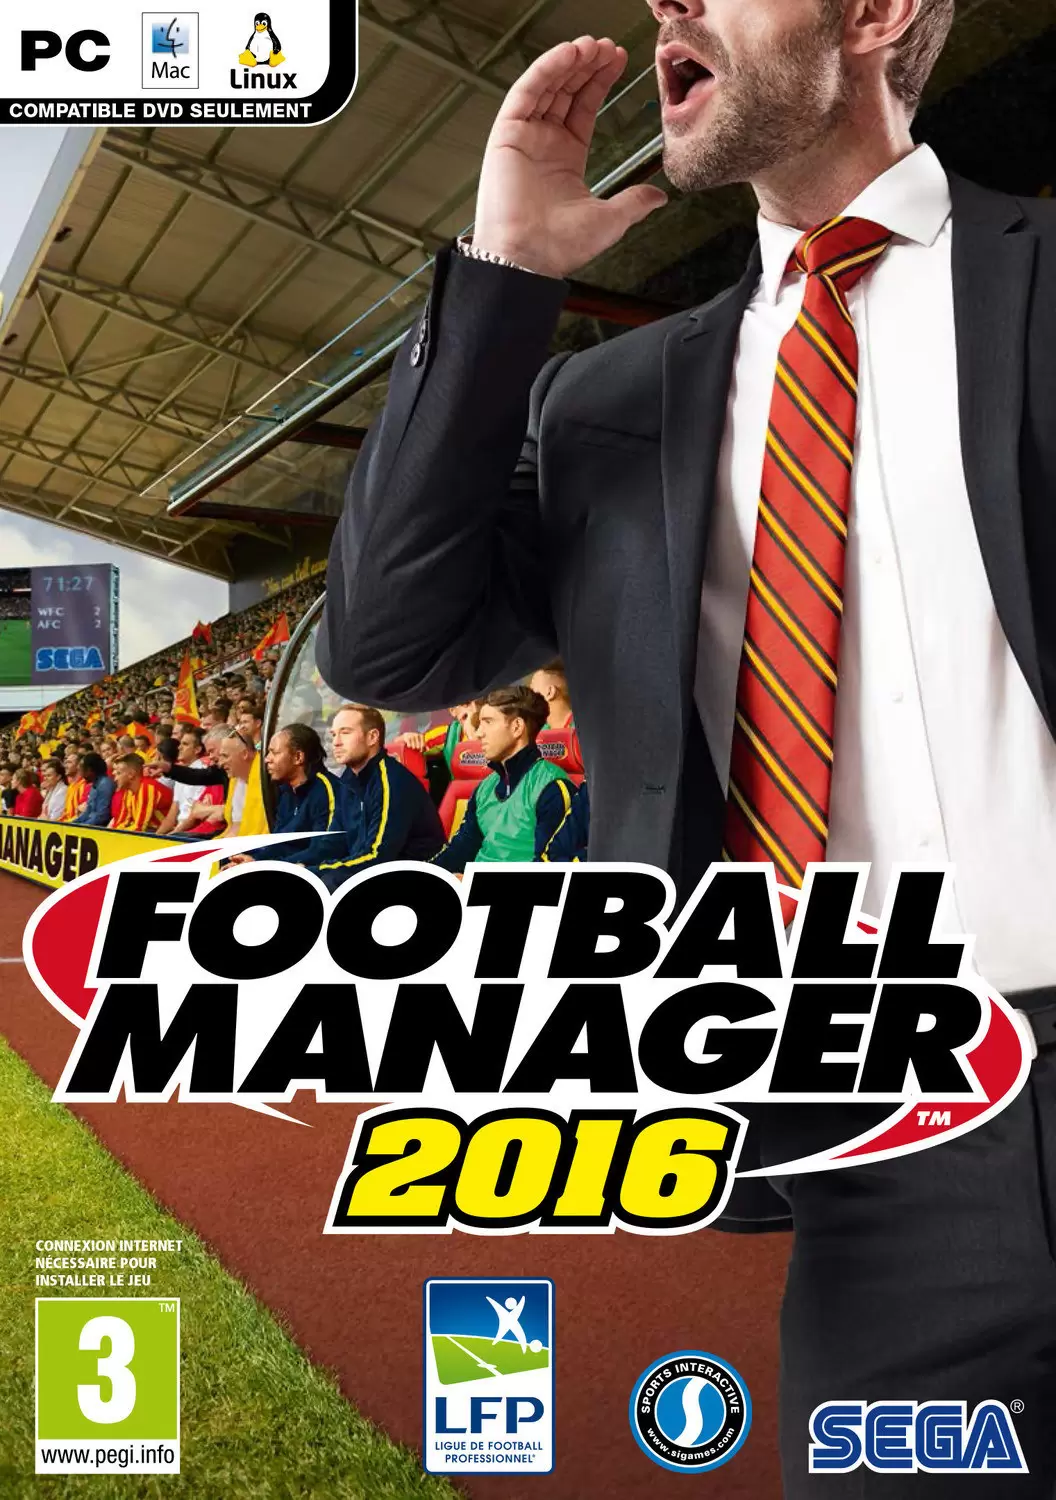 PC Games - Football Manager 2016